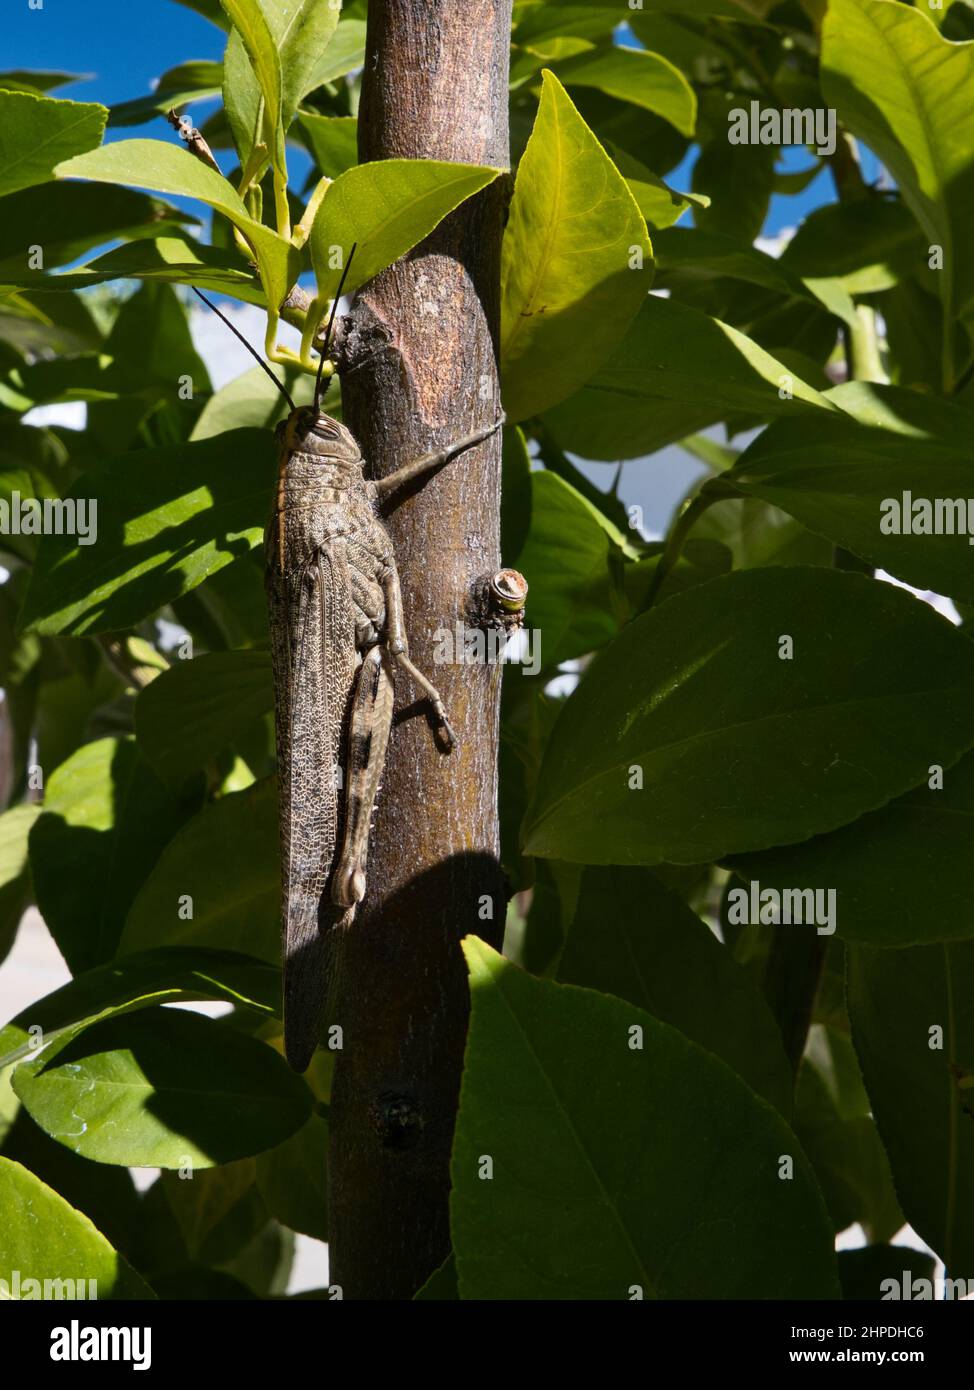 Locust camuflated on the trunk of a lemon tree. Stock Photo